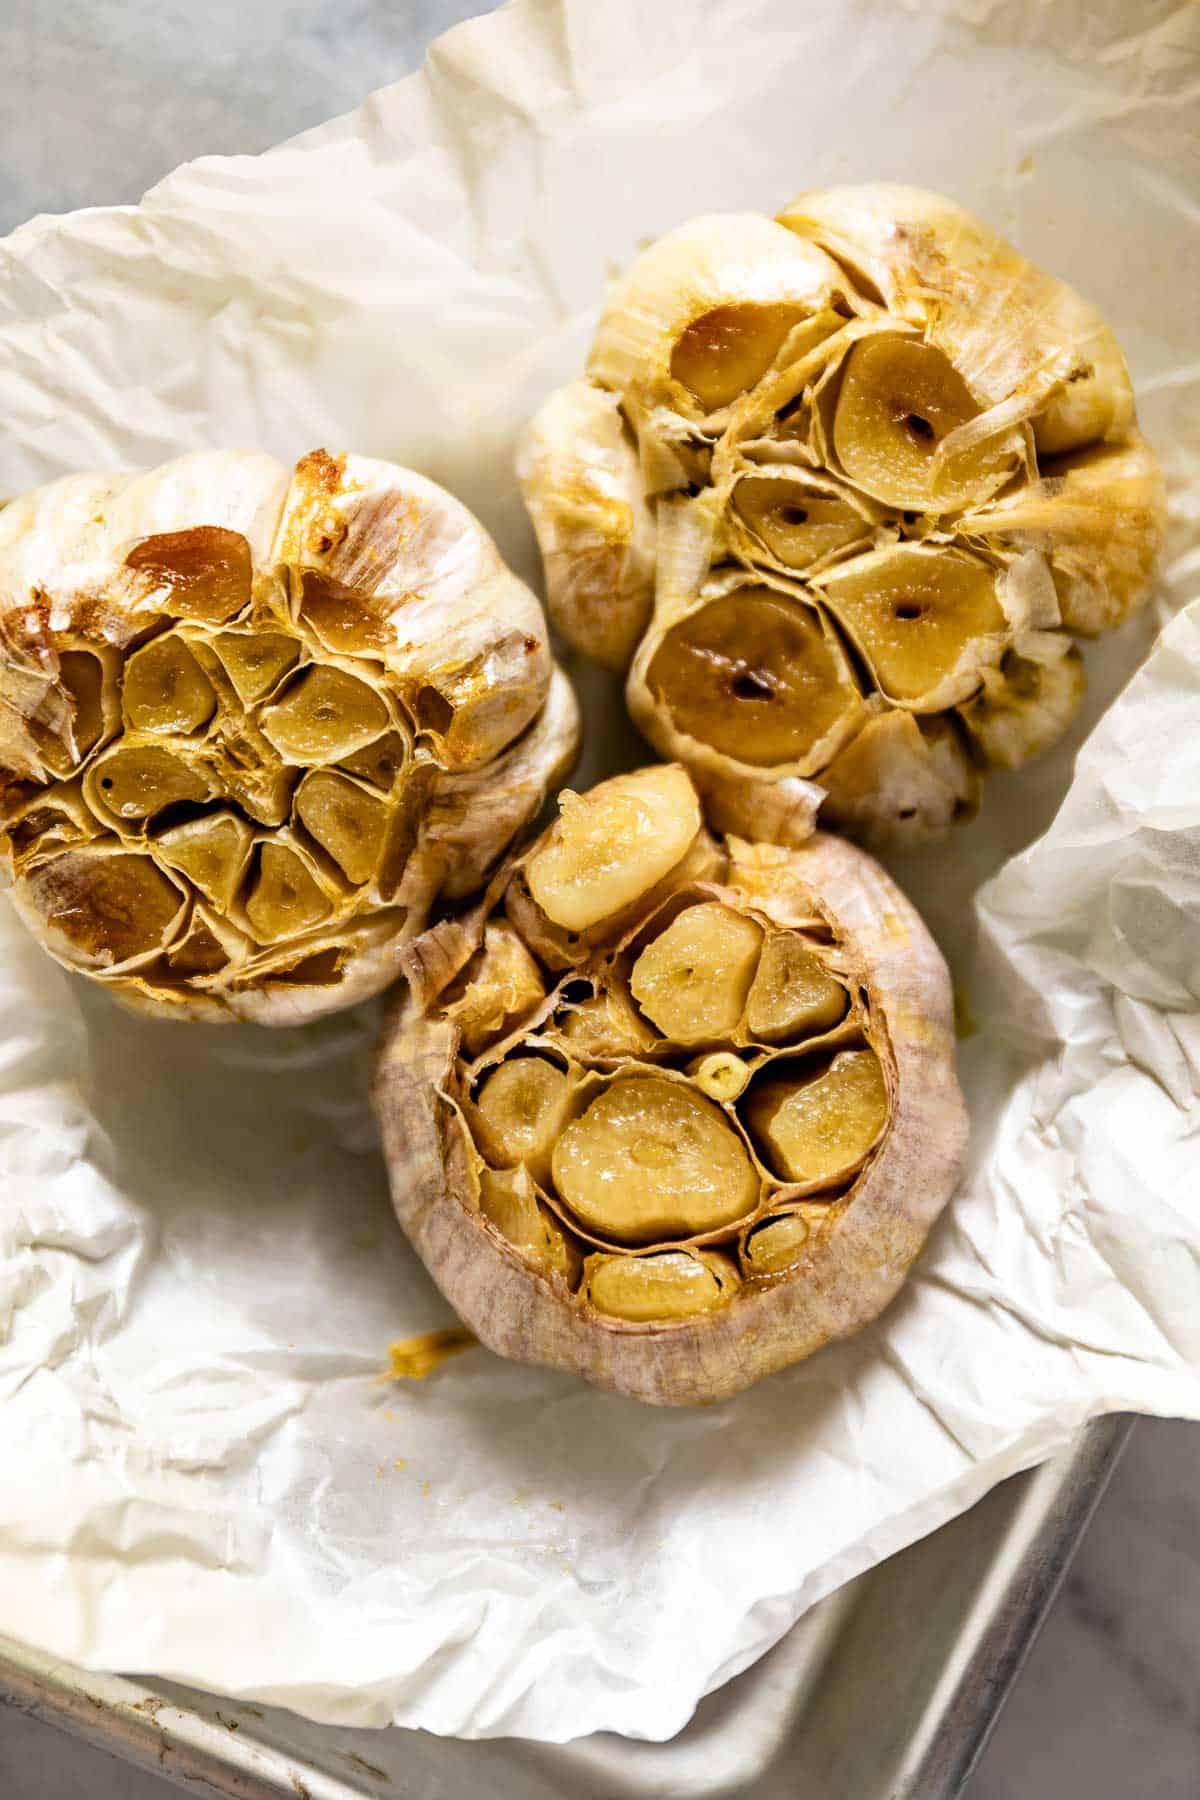 How To Roast Garlic Without Foil